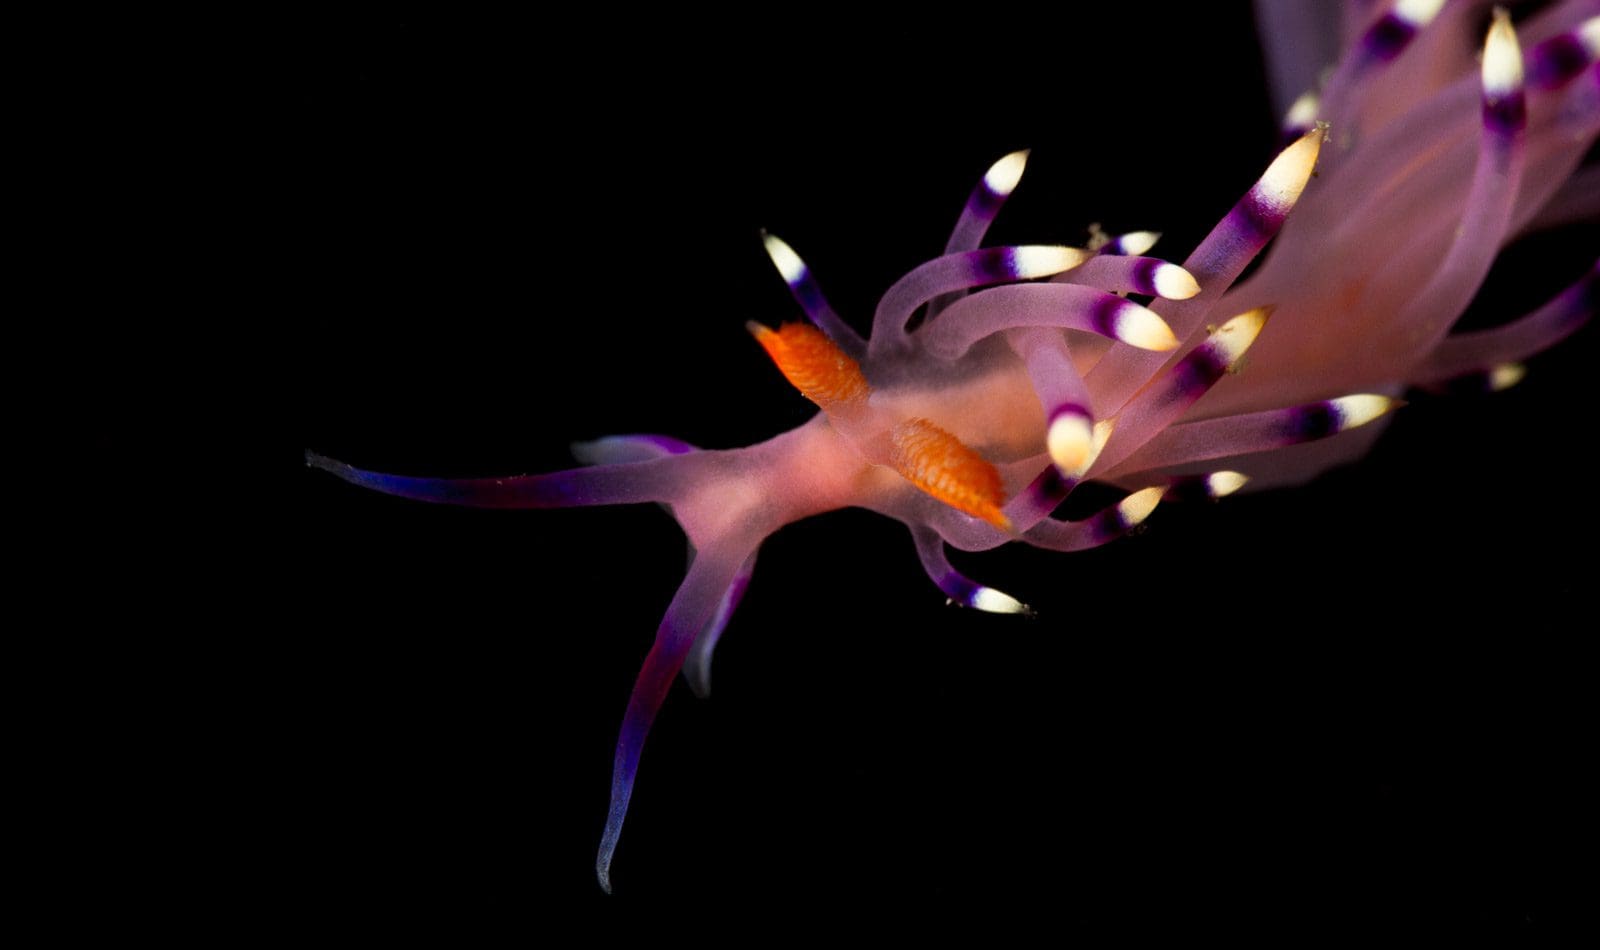 the flabellina species found at Nudifall